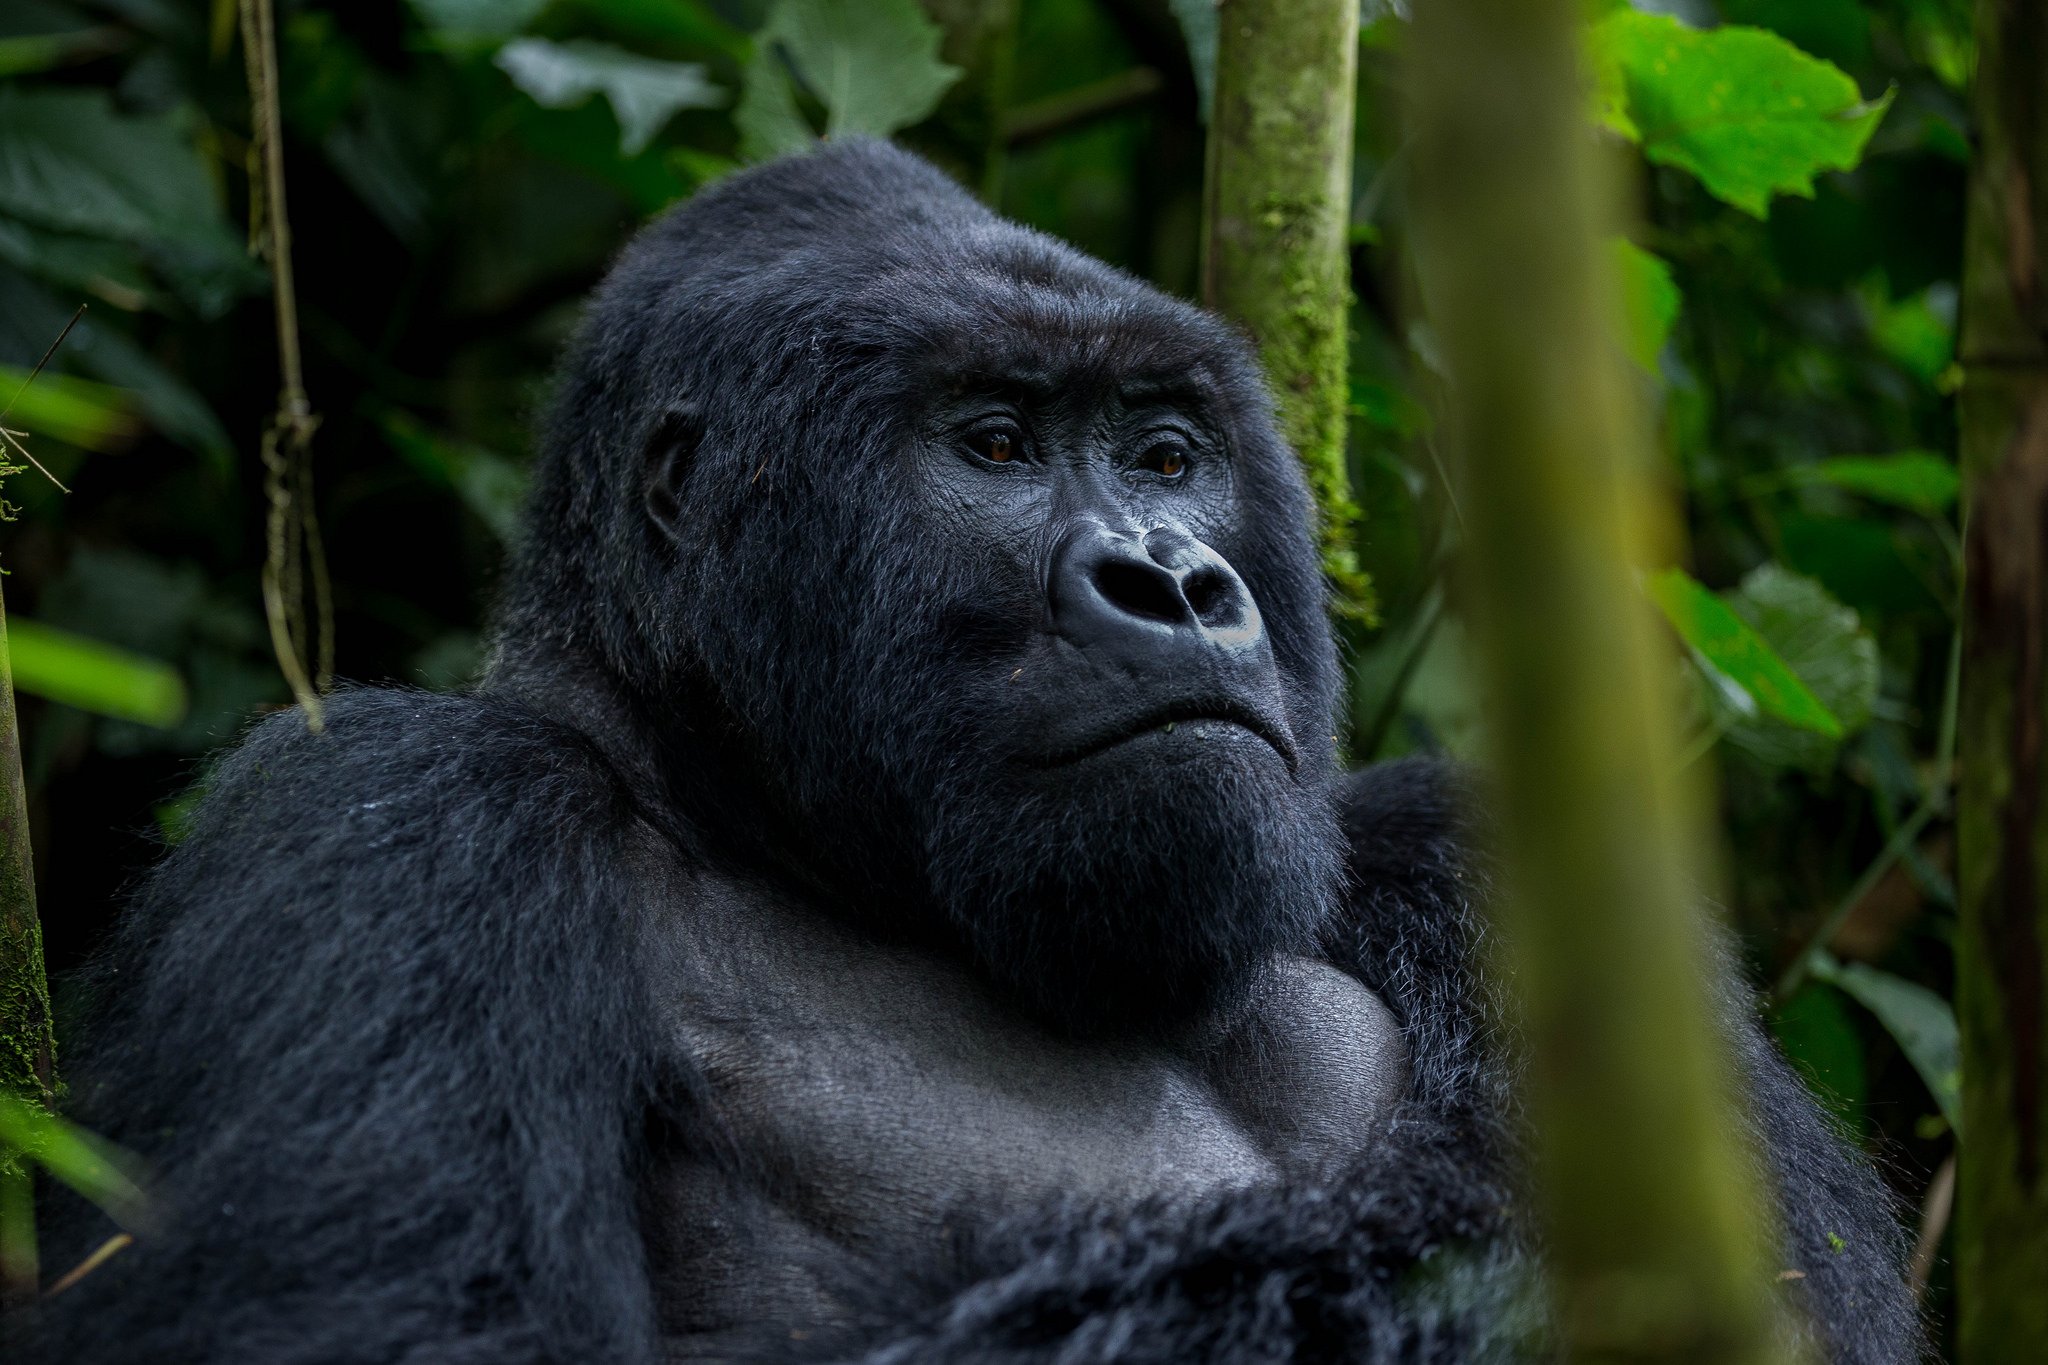 What you should know about seasons when planning a gorilla safari in Uganda